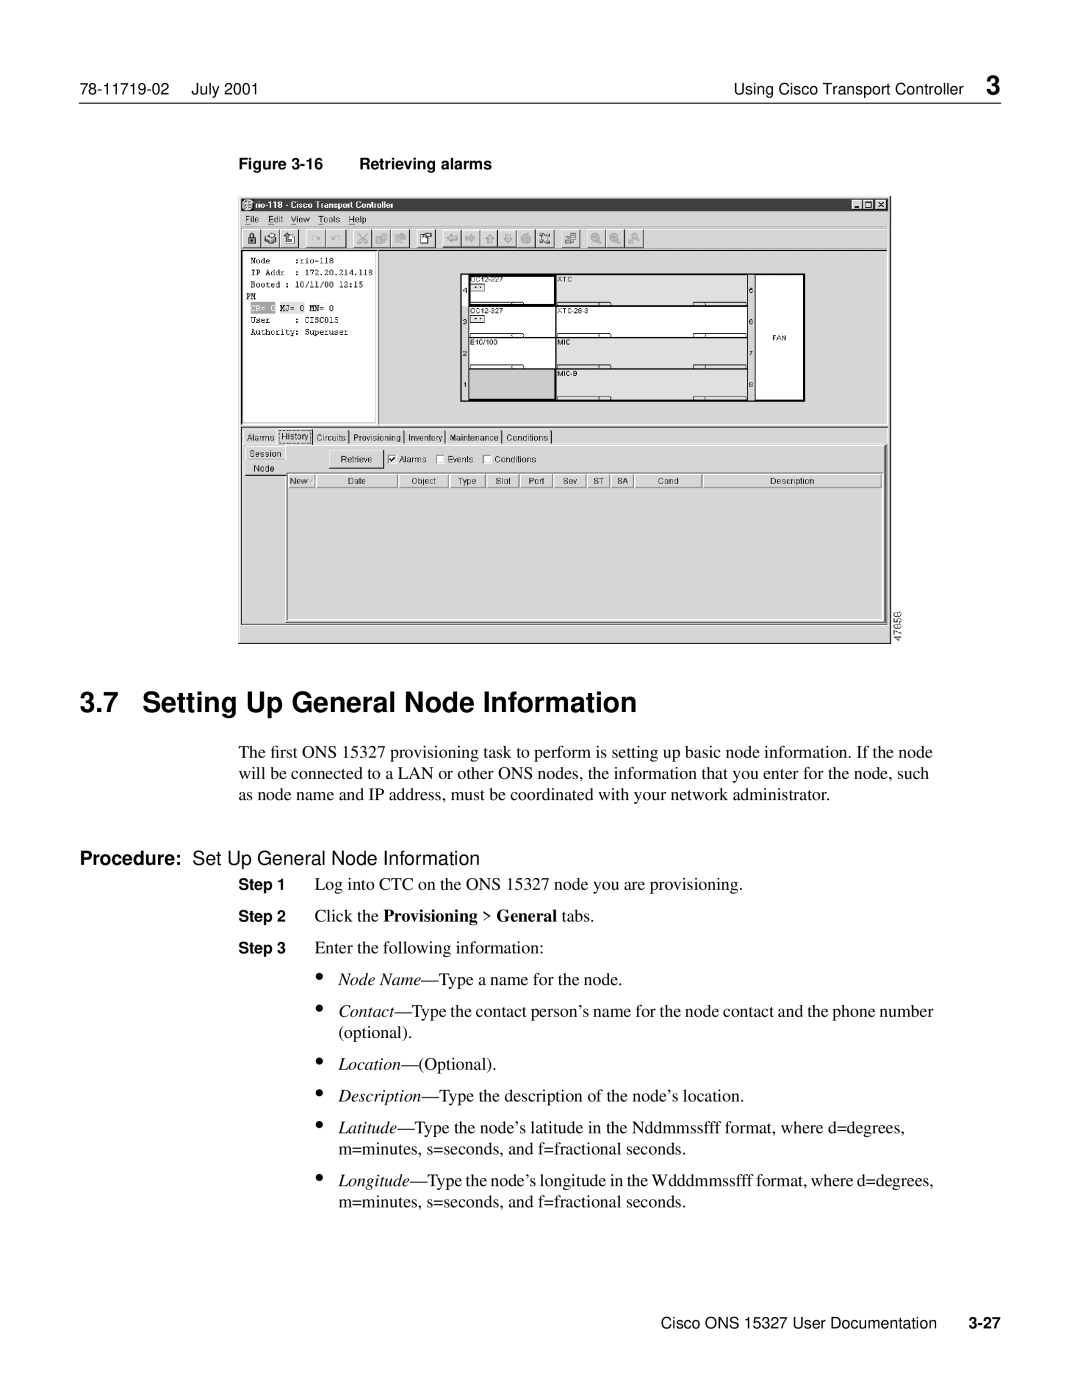 Cisco Systems ONS 15327 manual Setting Up General Node Information, Procedure Set Up General Node Information 